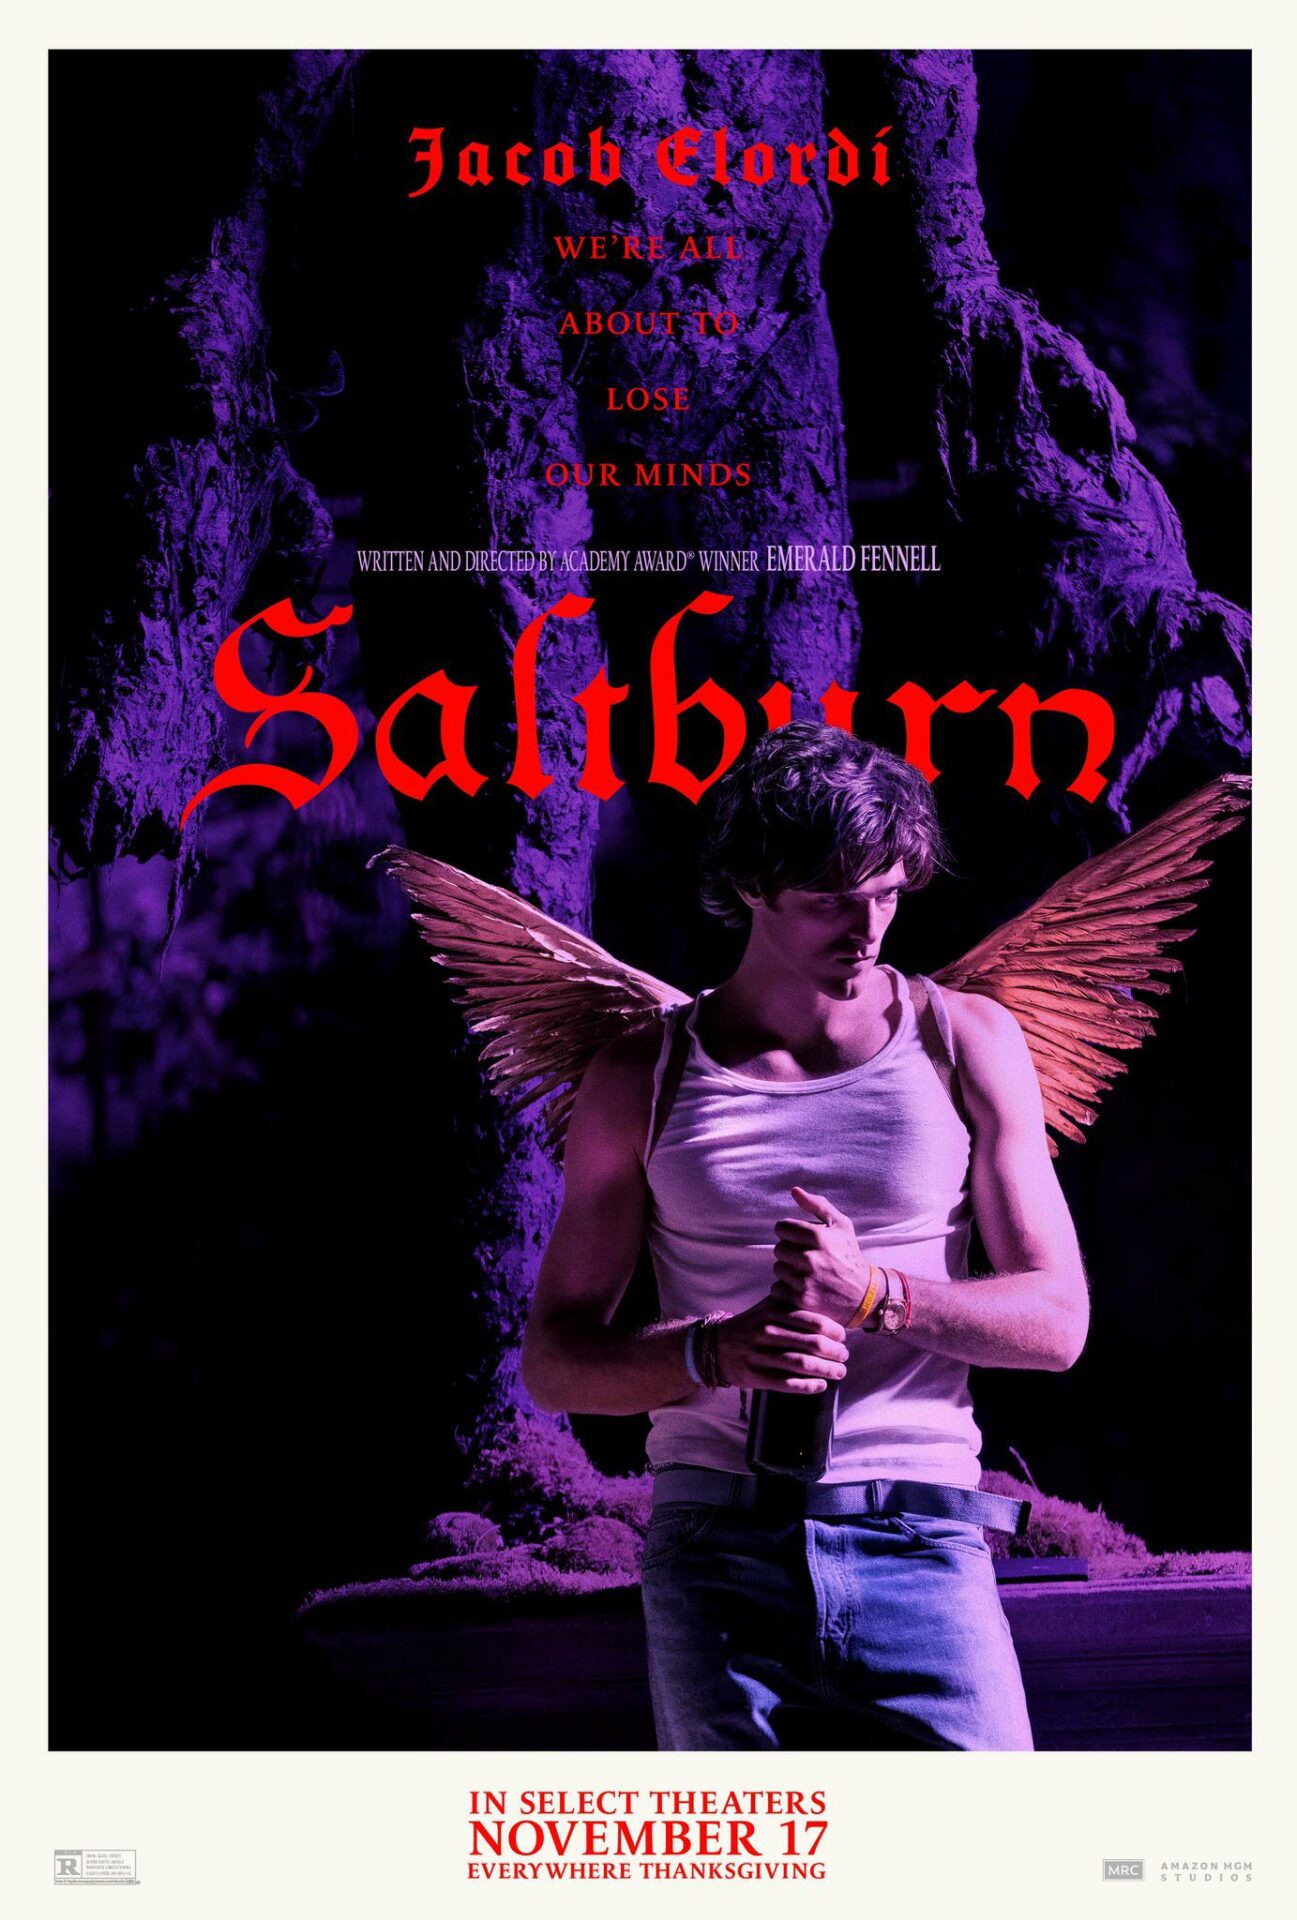 Jacob Elordi looks angelic in new poster for ‘Saltburn’ – Cine3.com